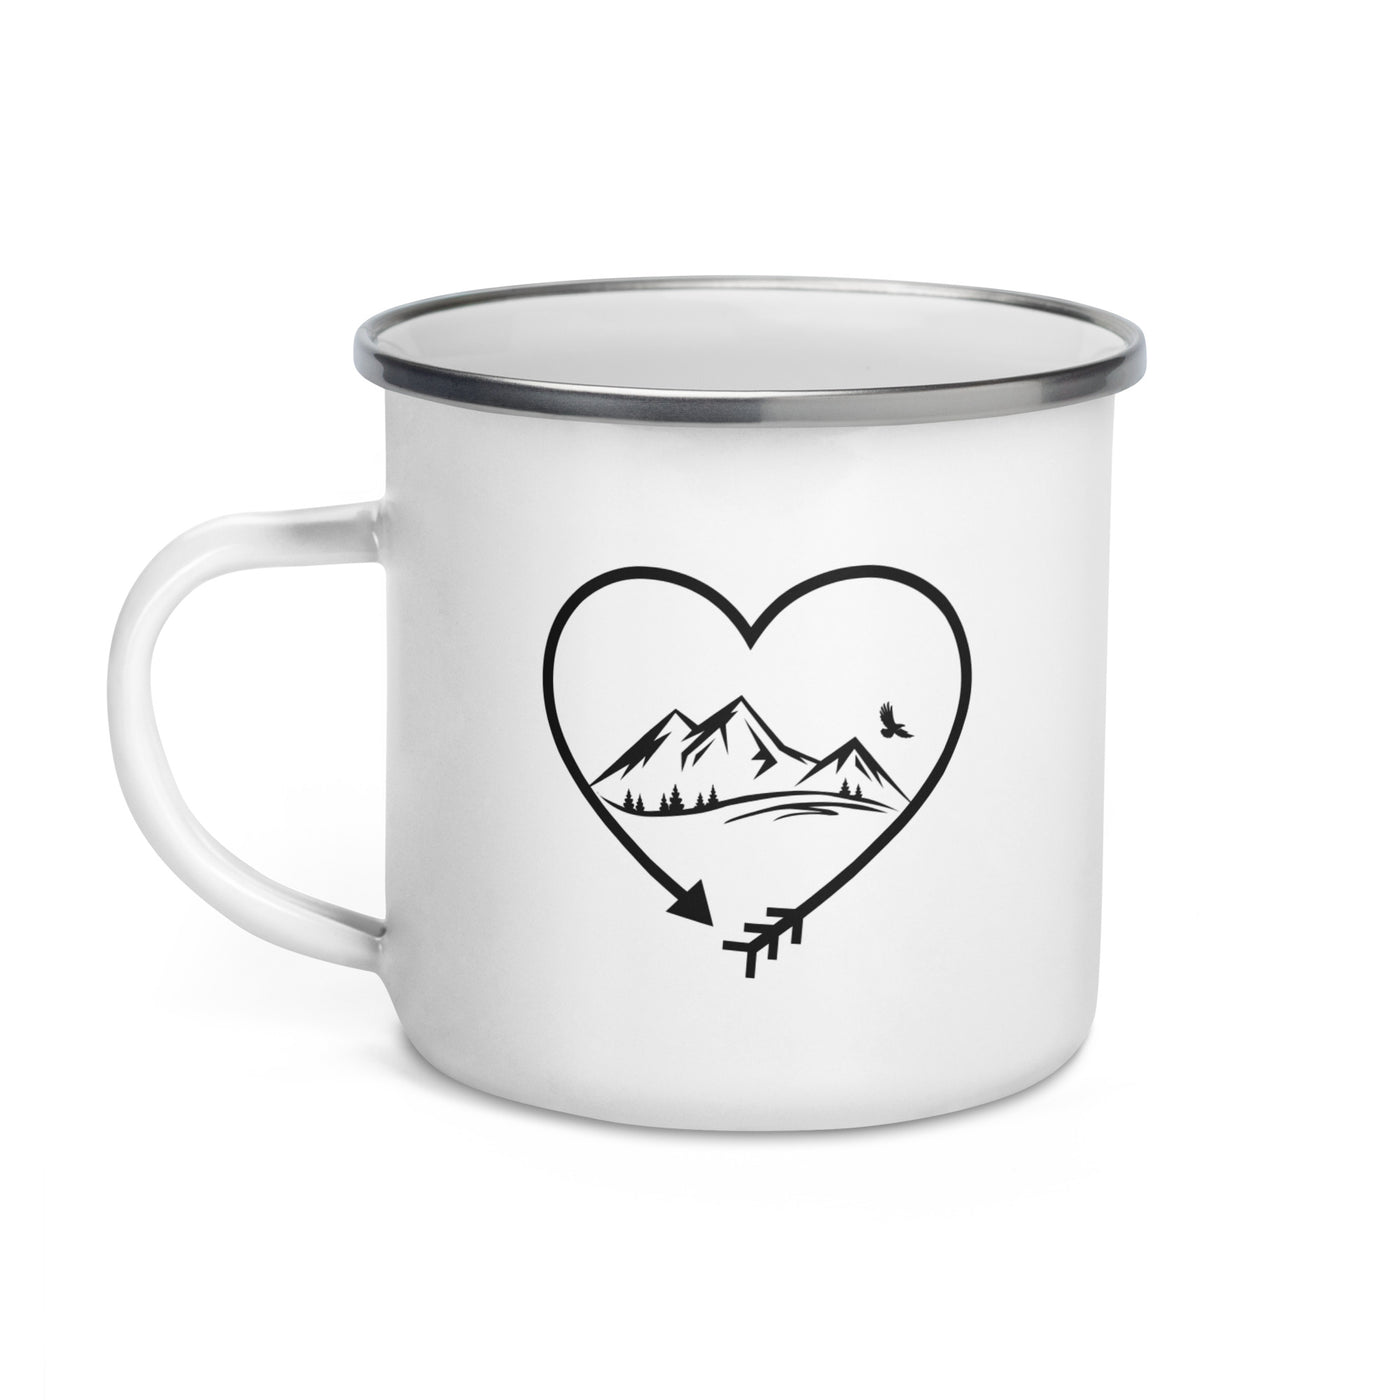 Arrow In Heartshape And Mountain - Emaille Tasse berge